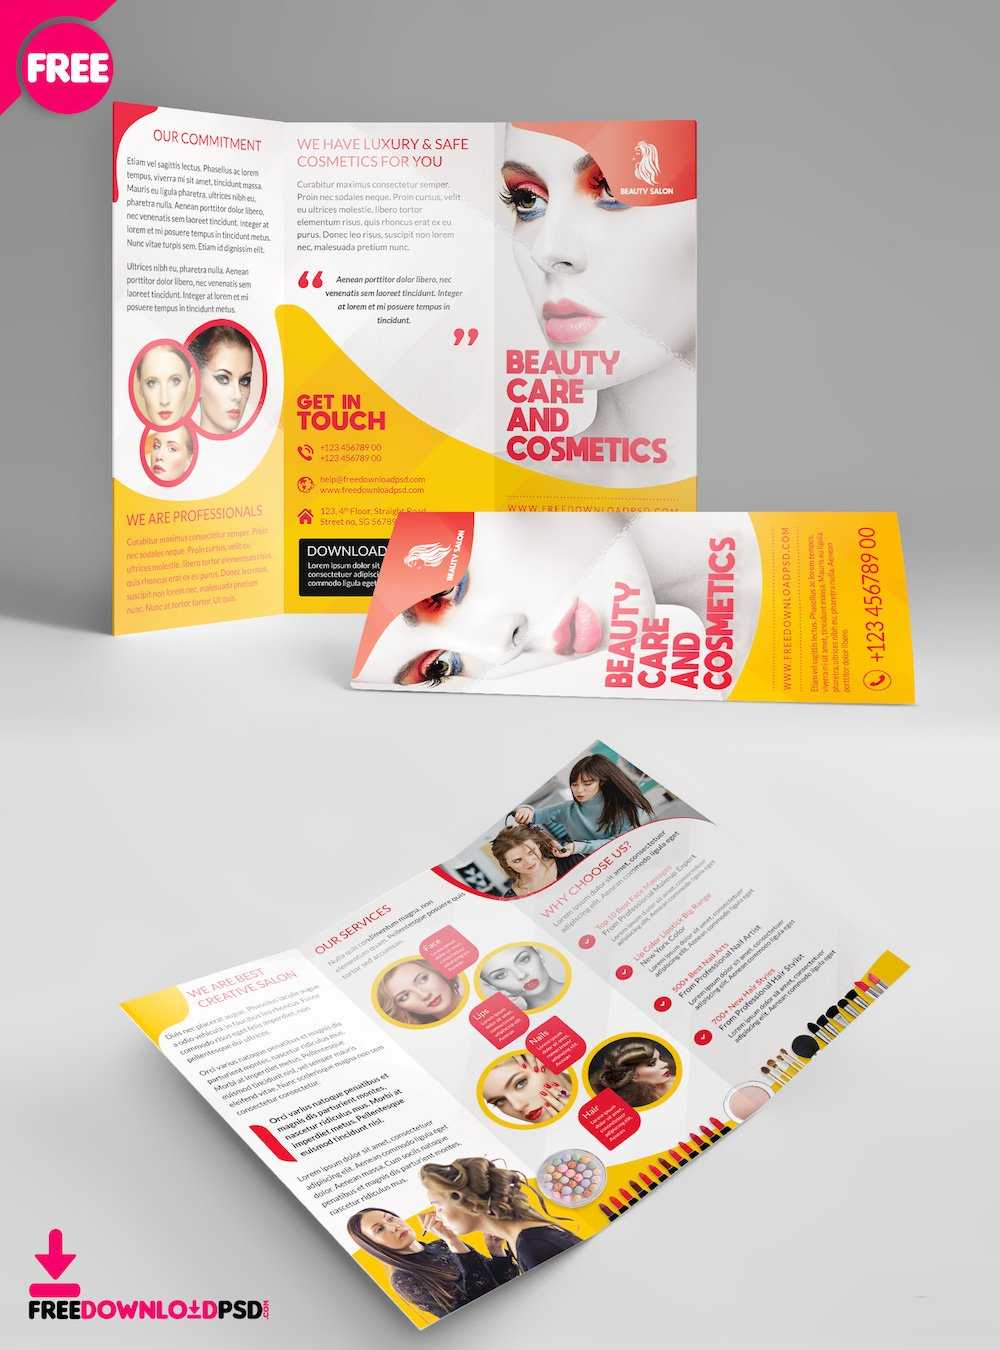 34 Best Free Brochure Mockups & Psd Templates 2019 – Colorlib Intended For Single Page Brochure Templates Psd